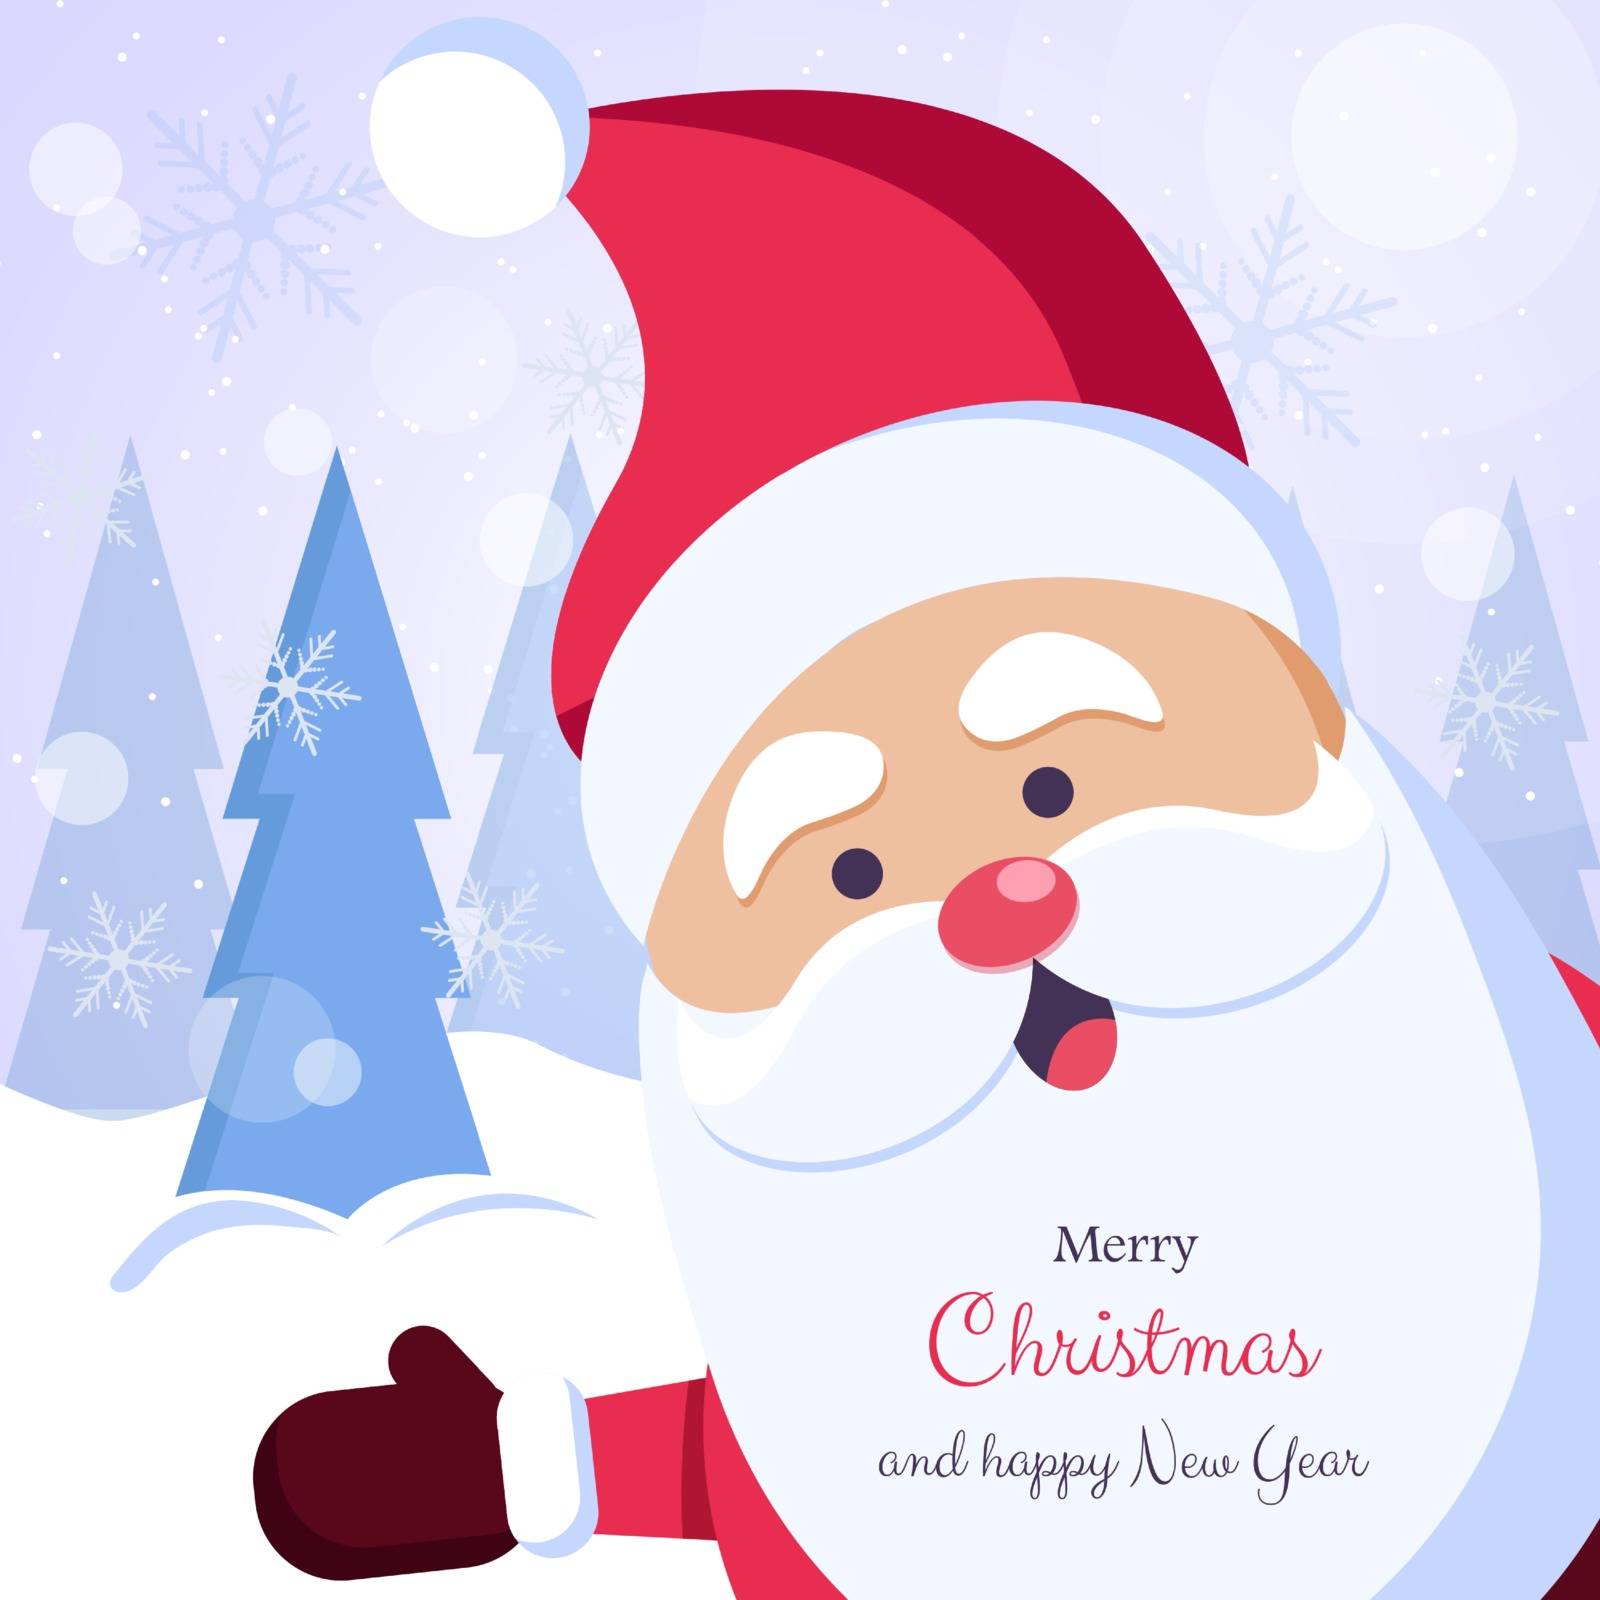 We Wish you a Merry Christmas. Happy new year. Santa Claus character with big signboard. Holiday greeting card with Christmas snow. Isolated vector illustration. by Helenshi